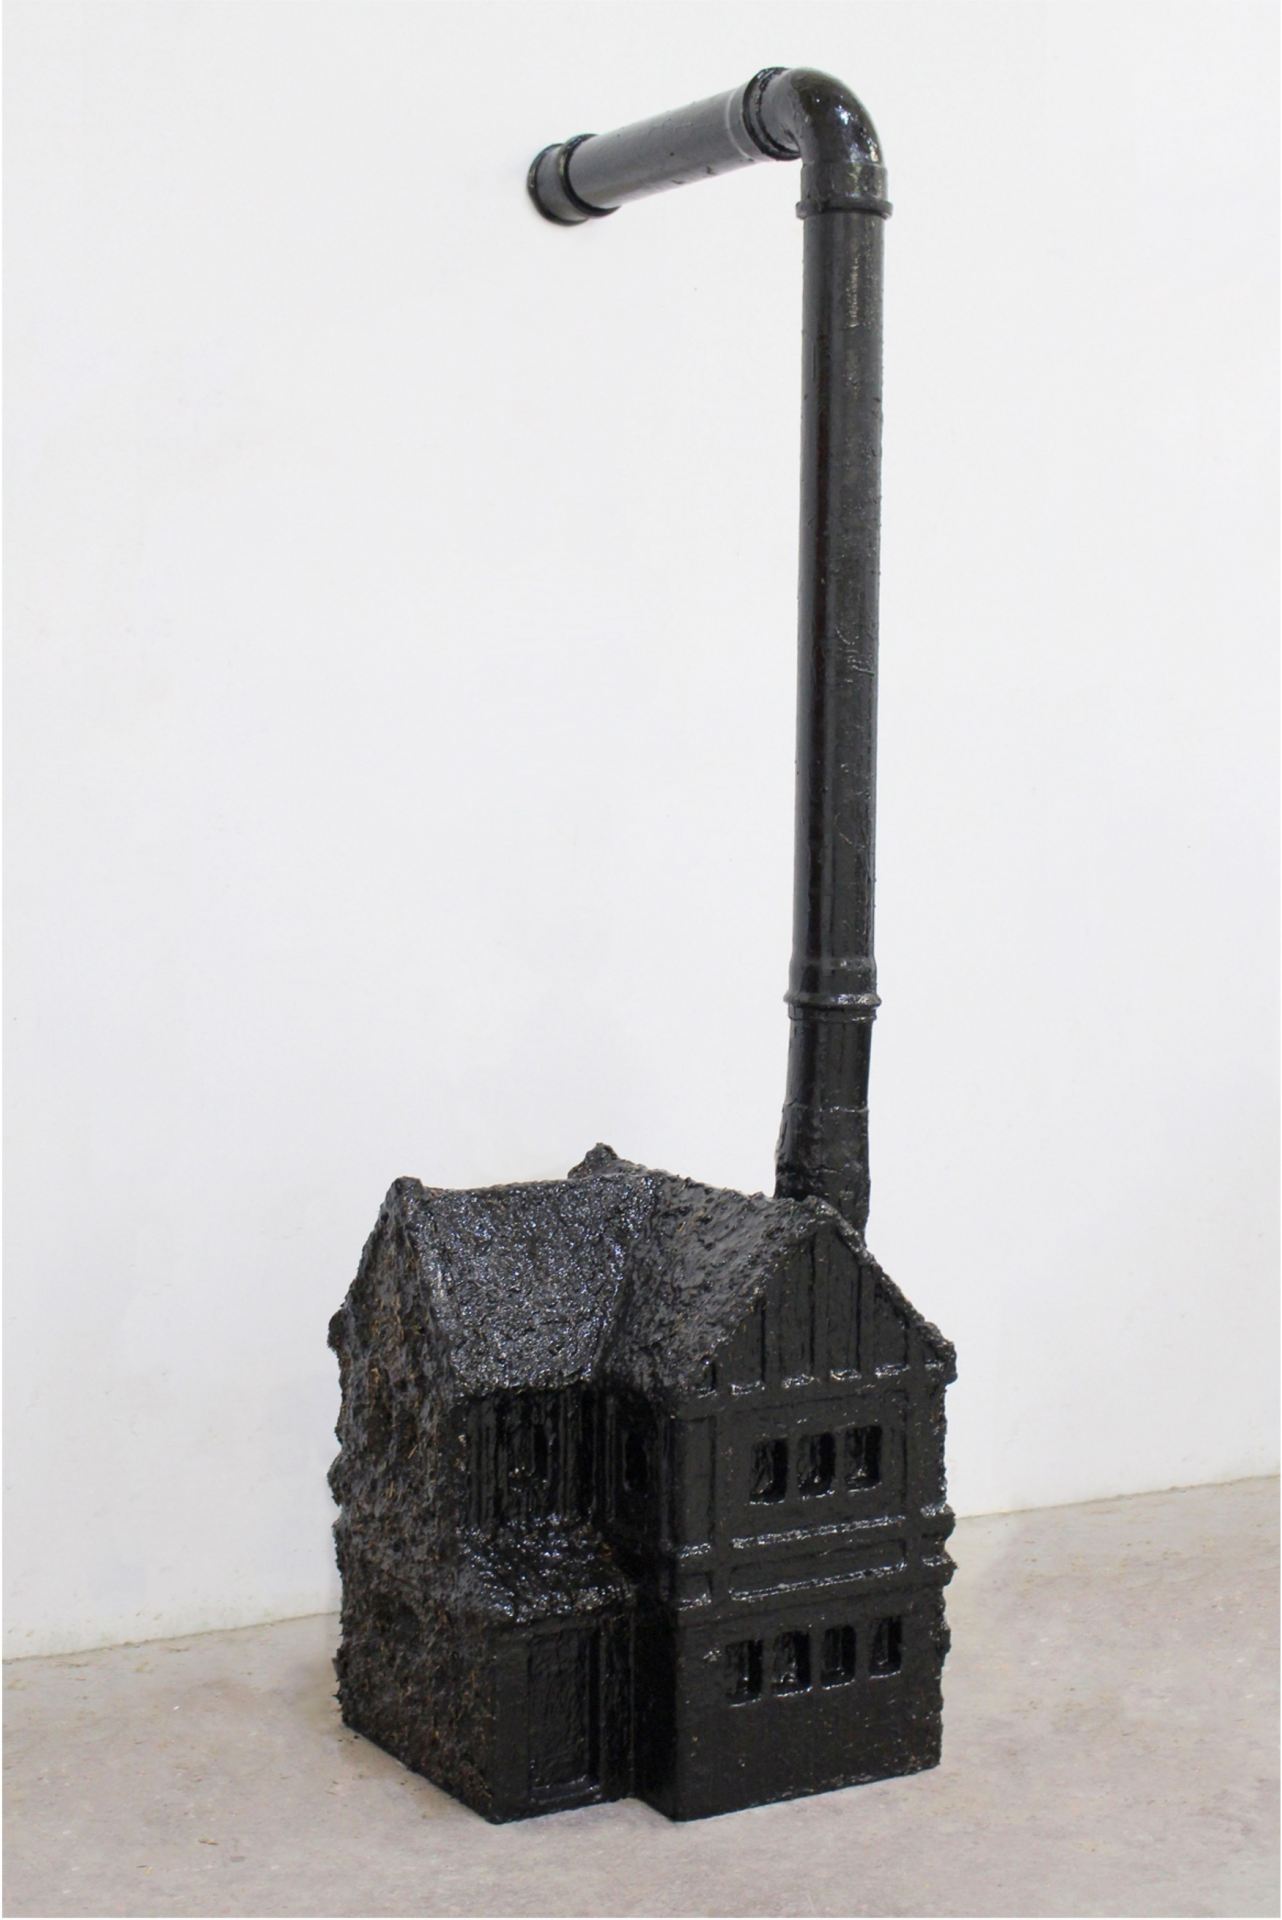 A small model of a black house with a drainpipe emerging from where it's chimney should be.